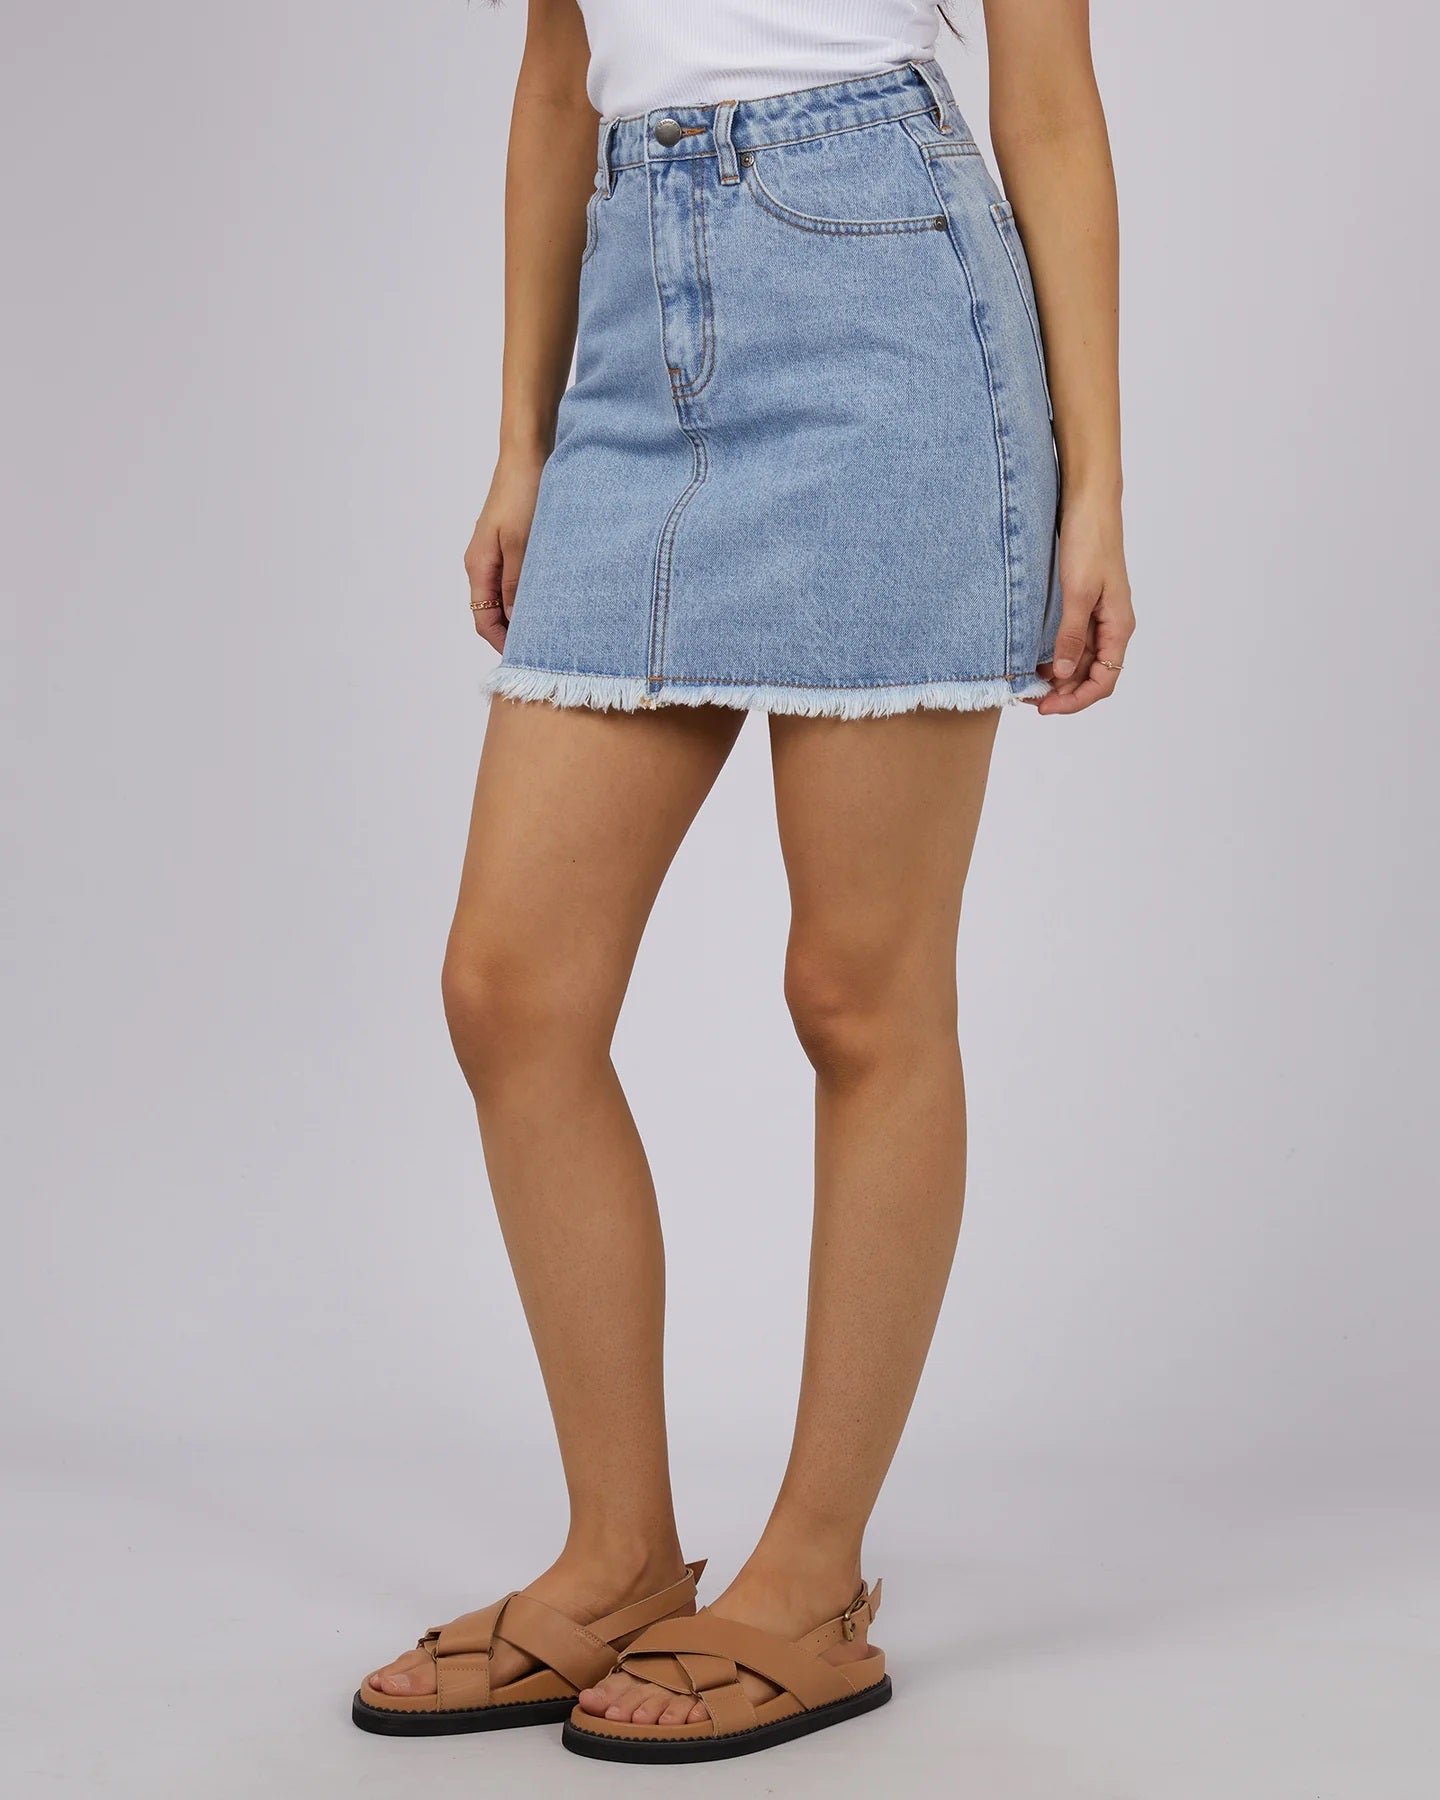 All About Eve Ray Mini Skirt [COLOUR:Light blue denim SIZE:6]